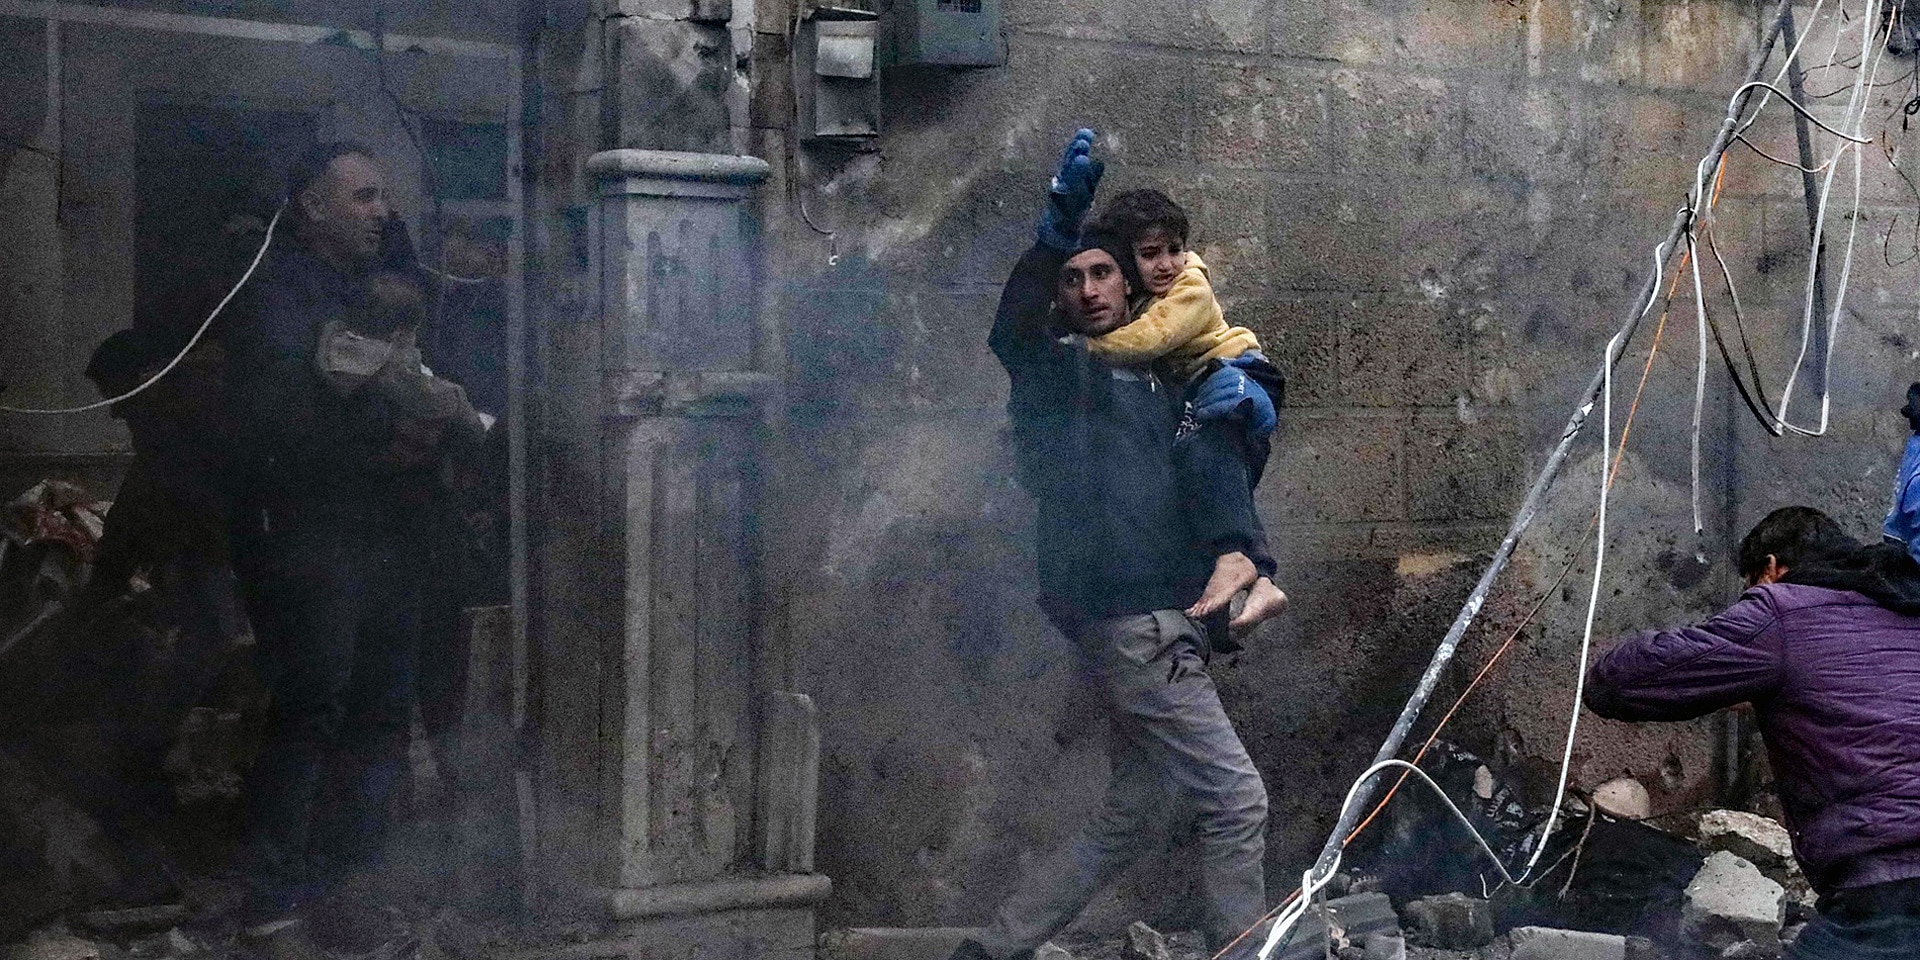 A man holds a child amidst rubble in Syria.